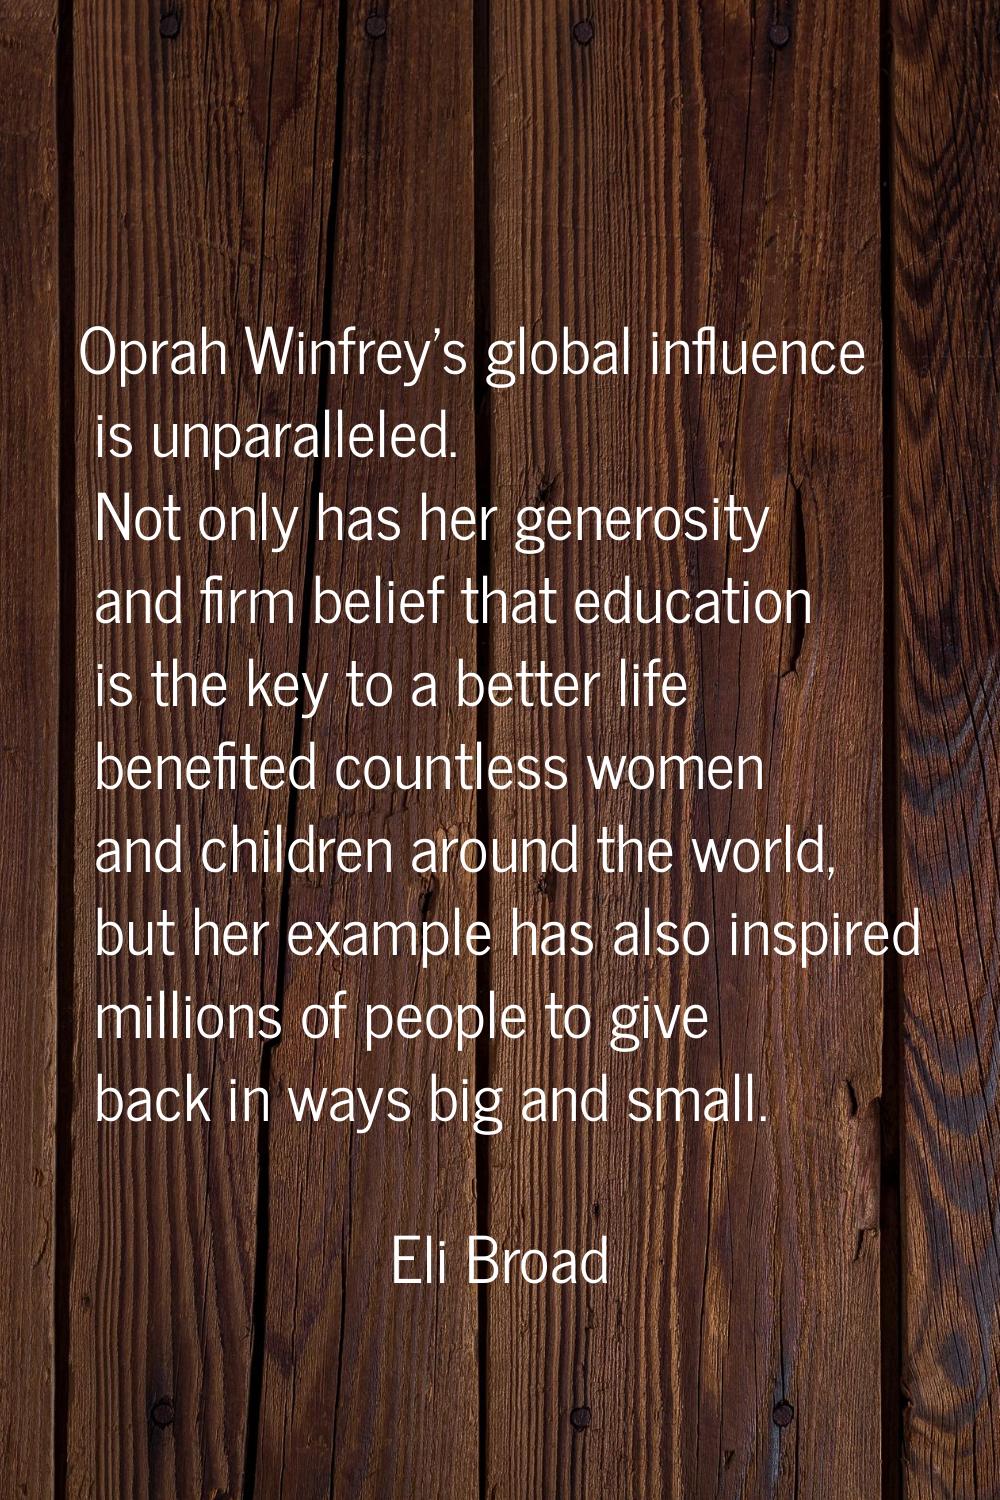 Oprah Winfrey's global influence is unparalleled. Not only has her generosity and firm belief that 